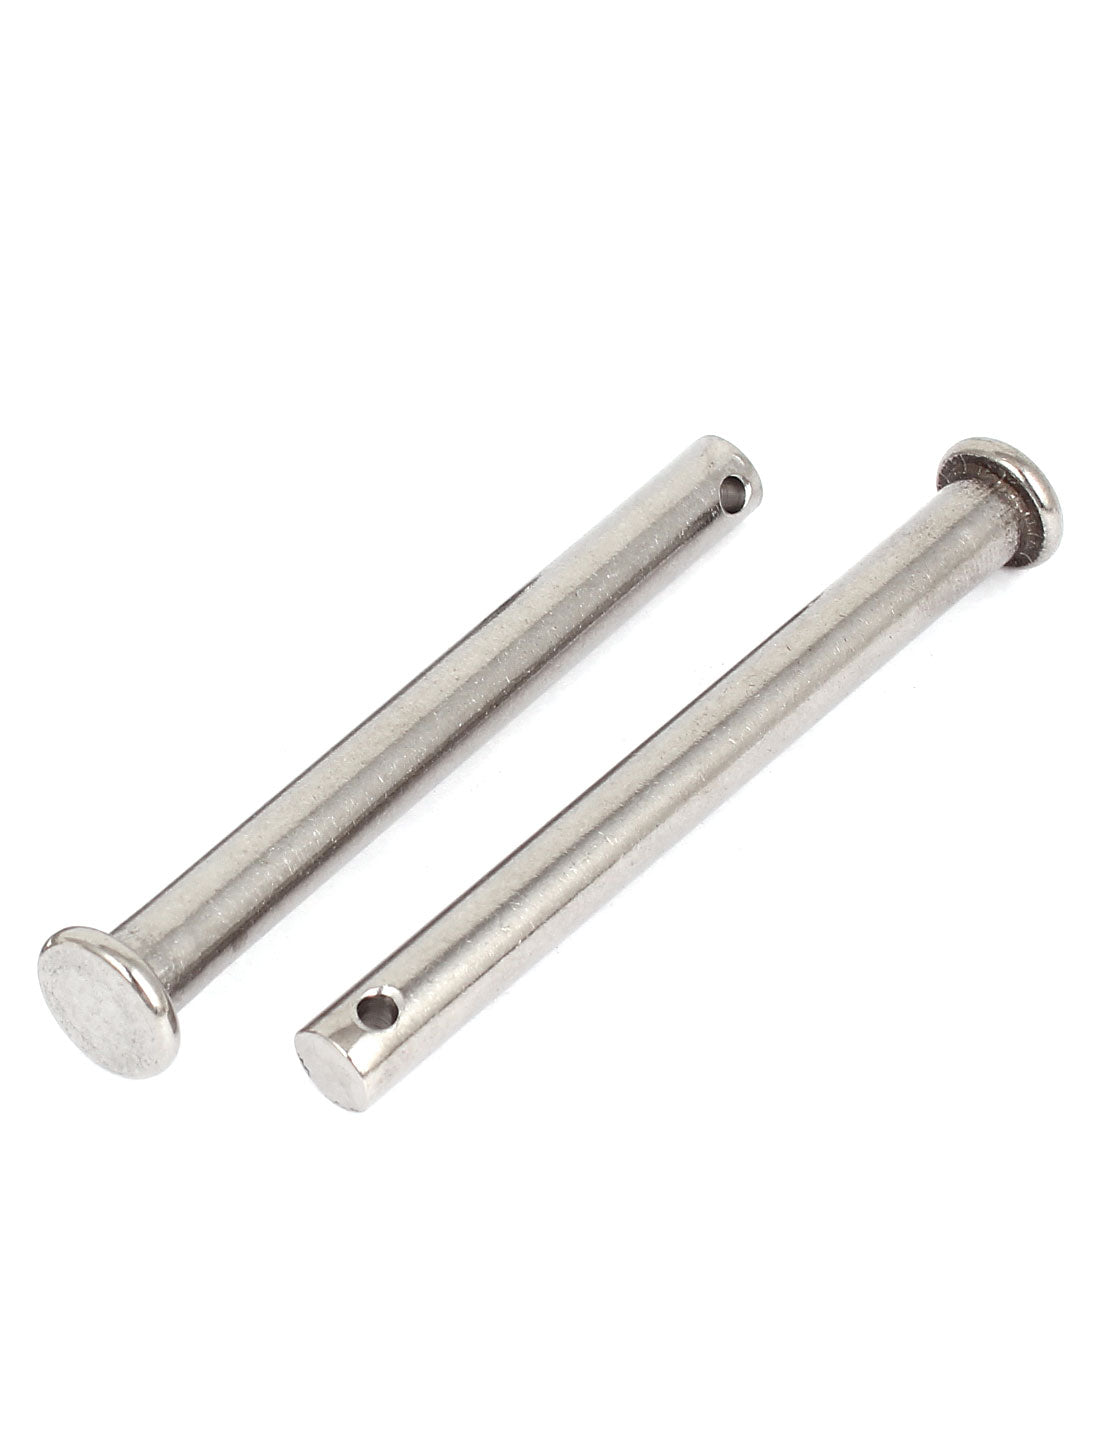 uxcell Uxcell M8 x 80mm Flat Head Stainless Steel Round Clevis Pins 5 Pieces